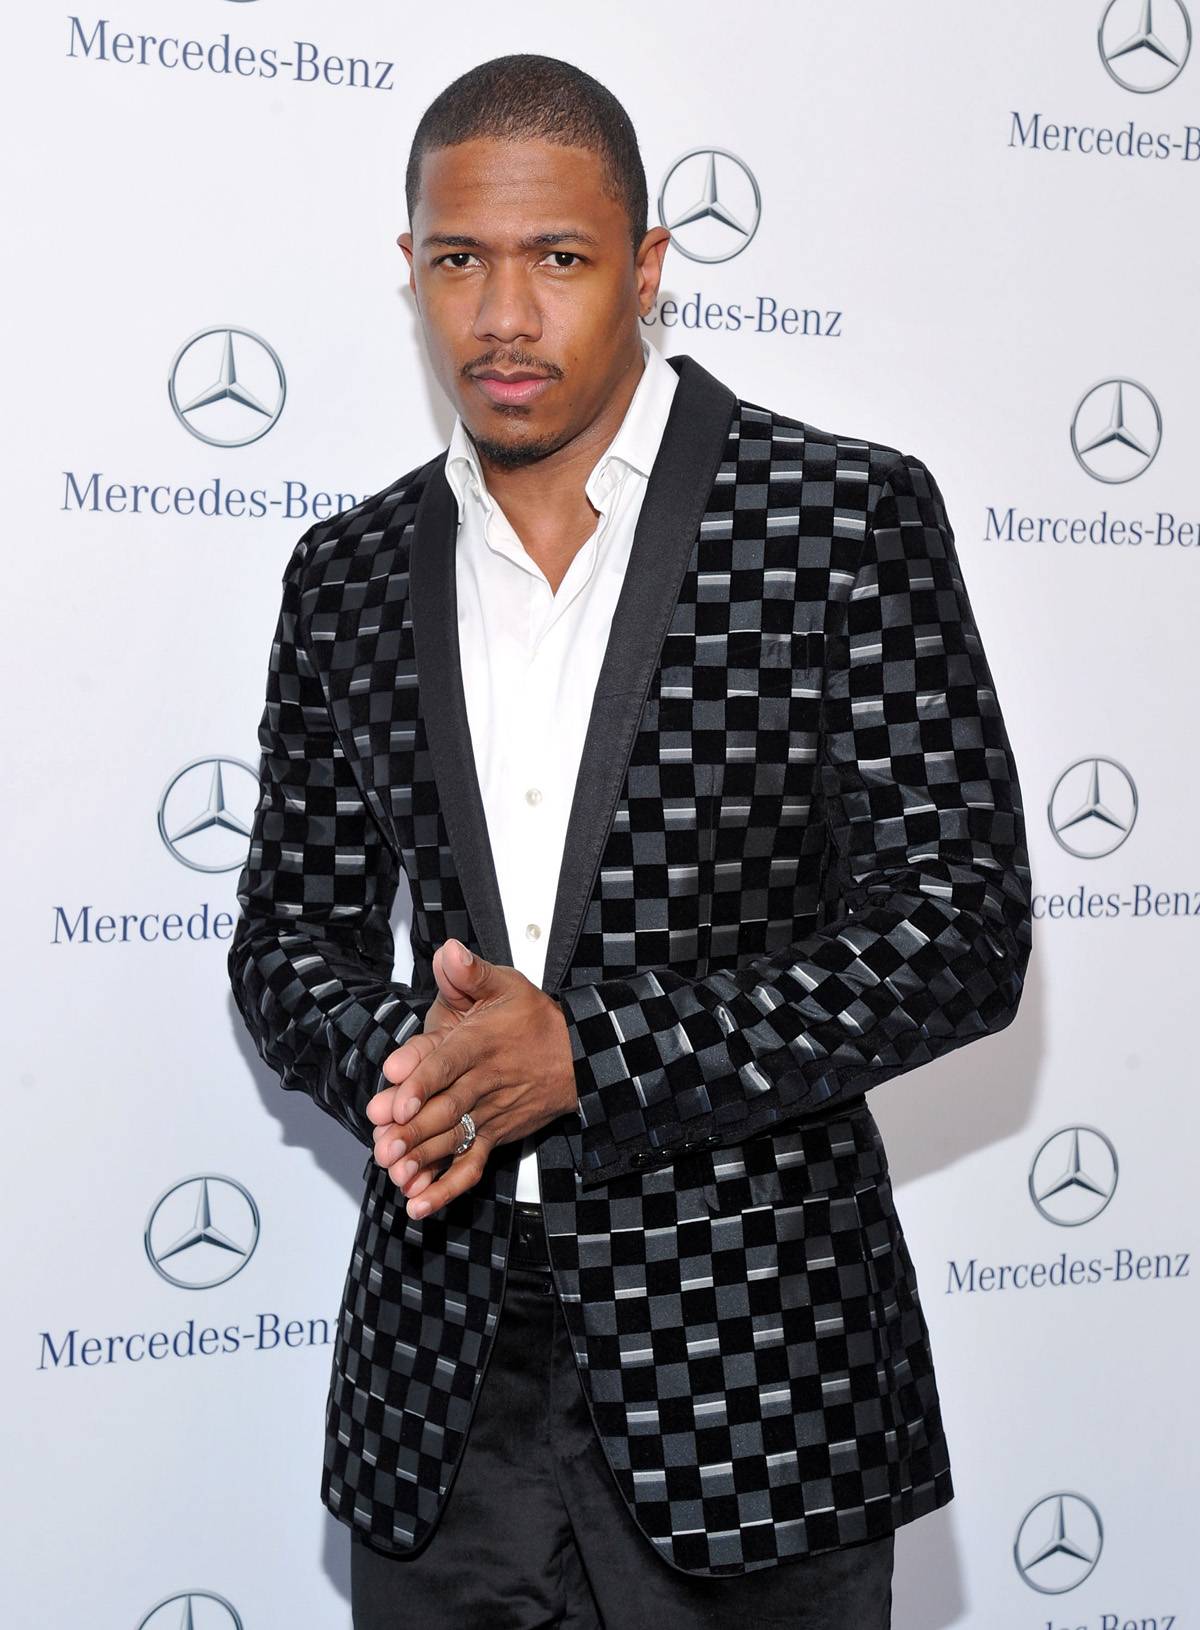 Nick Cannon - &quot;I just talked to @heavyd. He was just encouraging me about life&quot;&quot;This is crazy. @heavyd such a beautiful person. He did and will continue to inspire me&quot;(Photo: Mike Coppola/Getty Images for Mercedes-Benz)